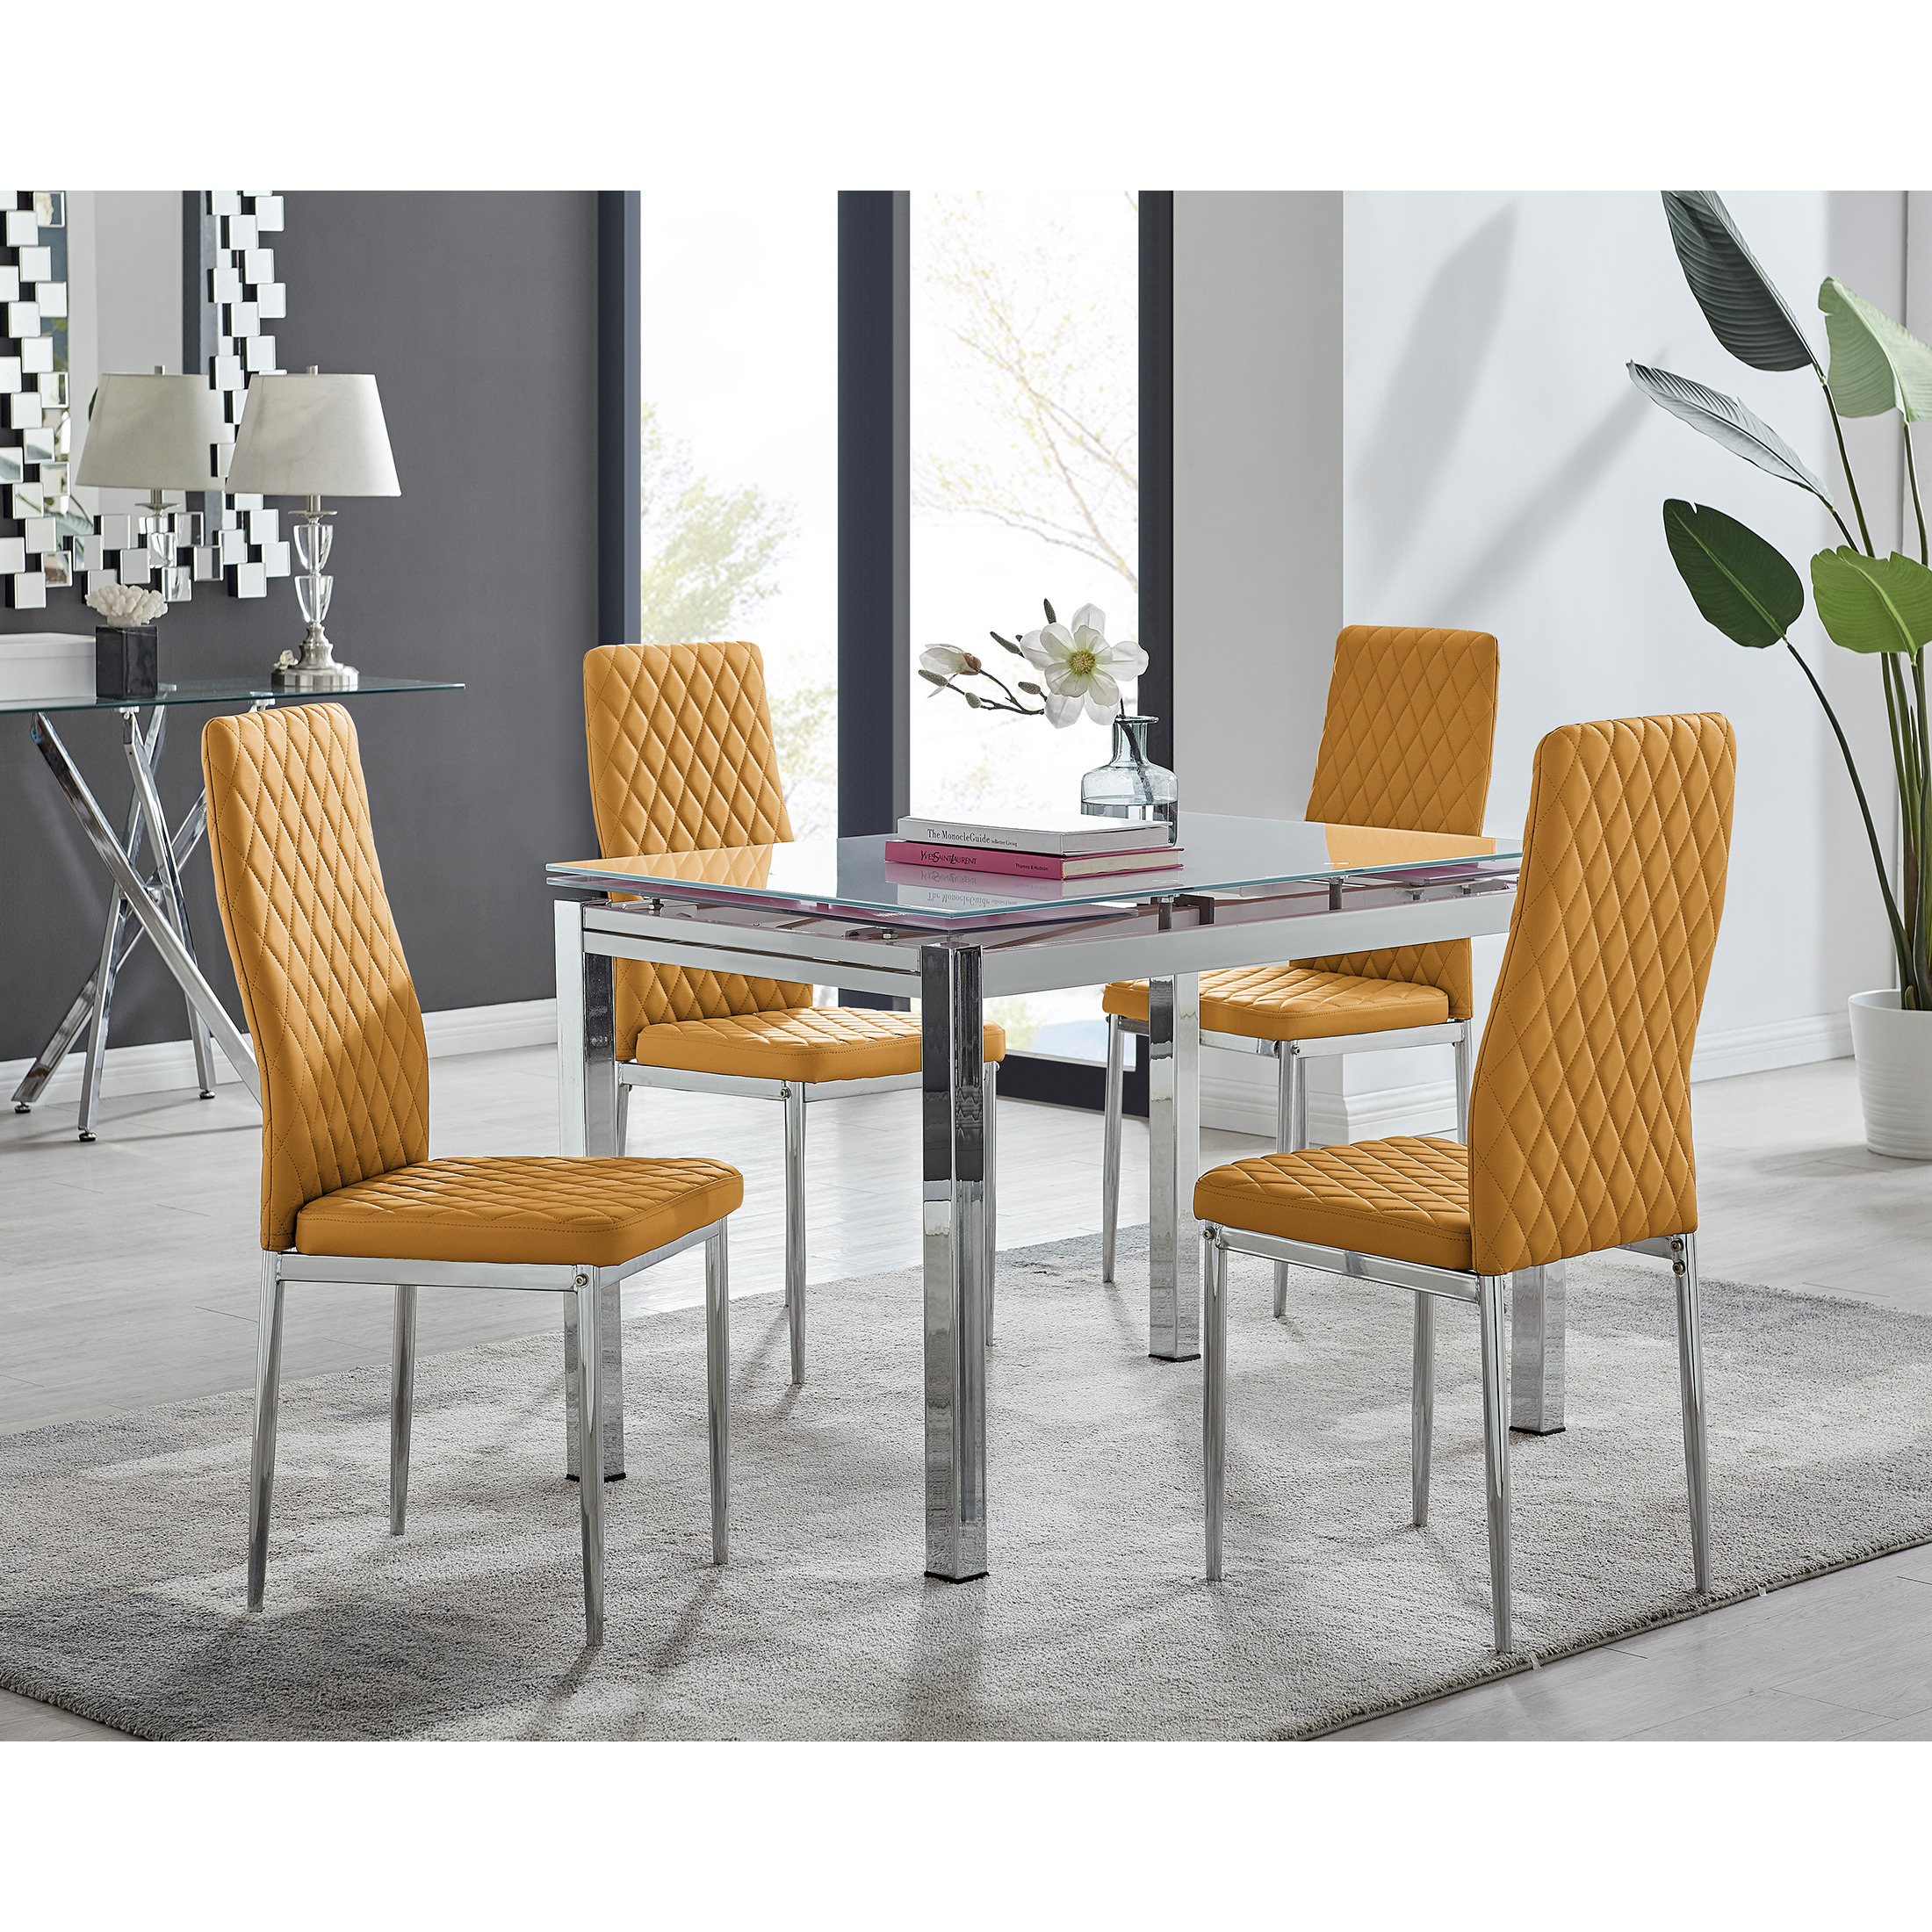 Enna White Glass Extending Dining Table and 4 Milan Chairs